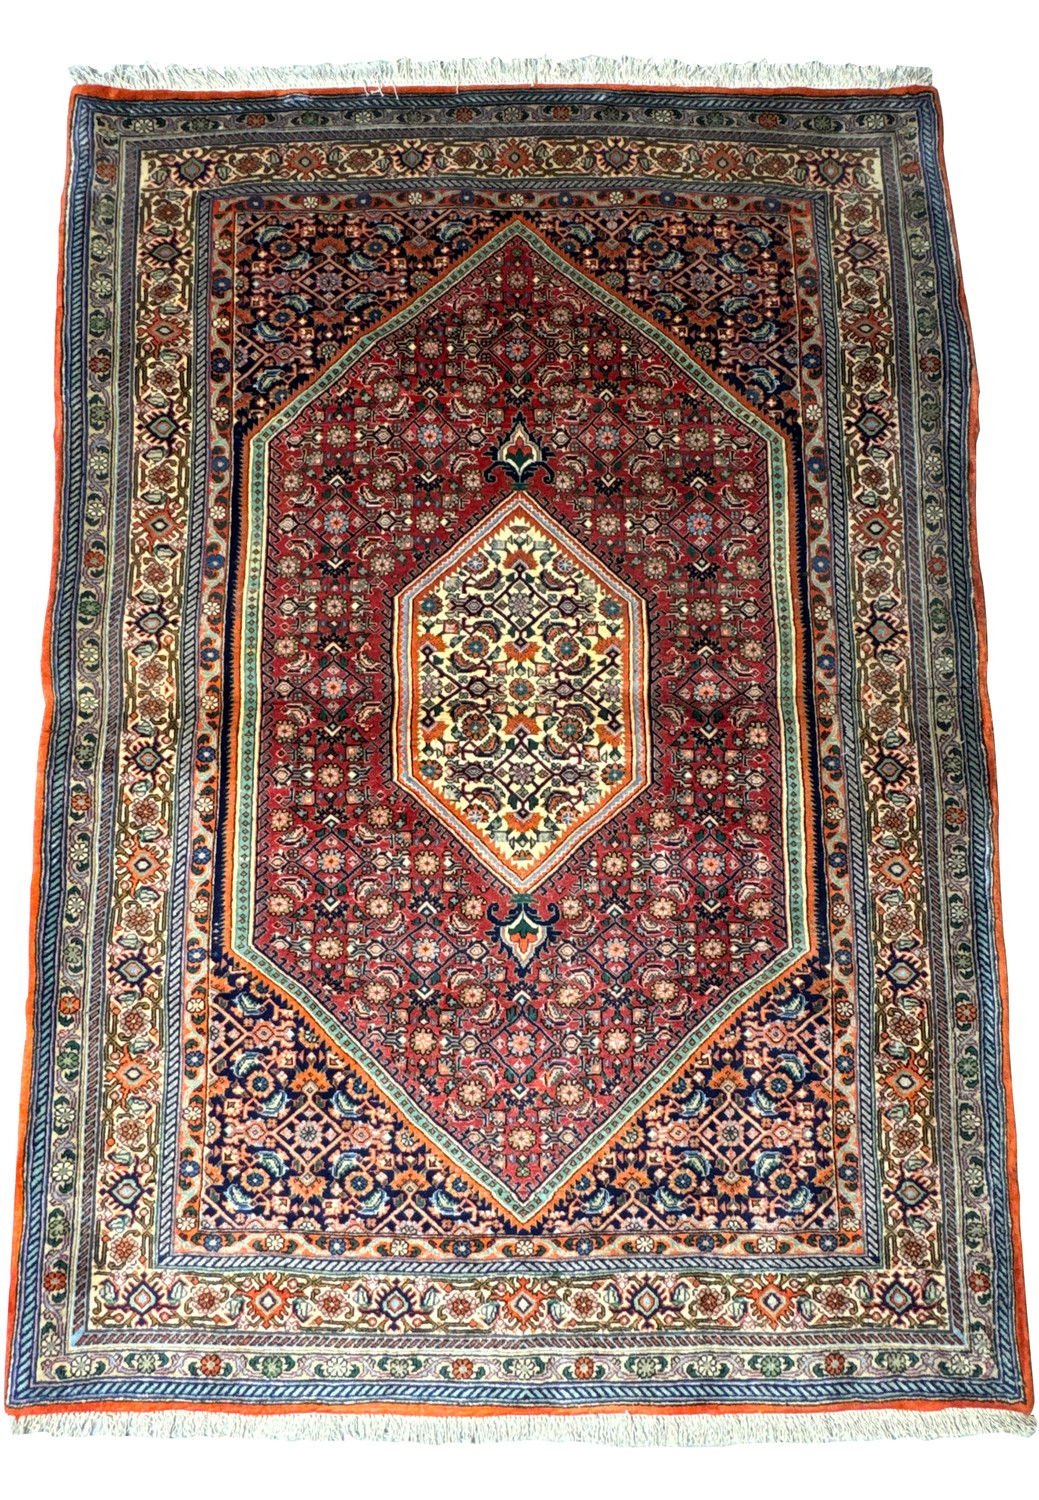 A detailed image of a Persian Bijar rug laid flat, showcasing the central medallion design with a red background and intricate floral patterns in indigo, ivory, and orange hues